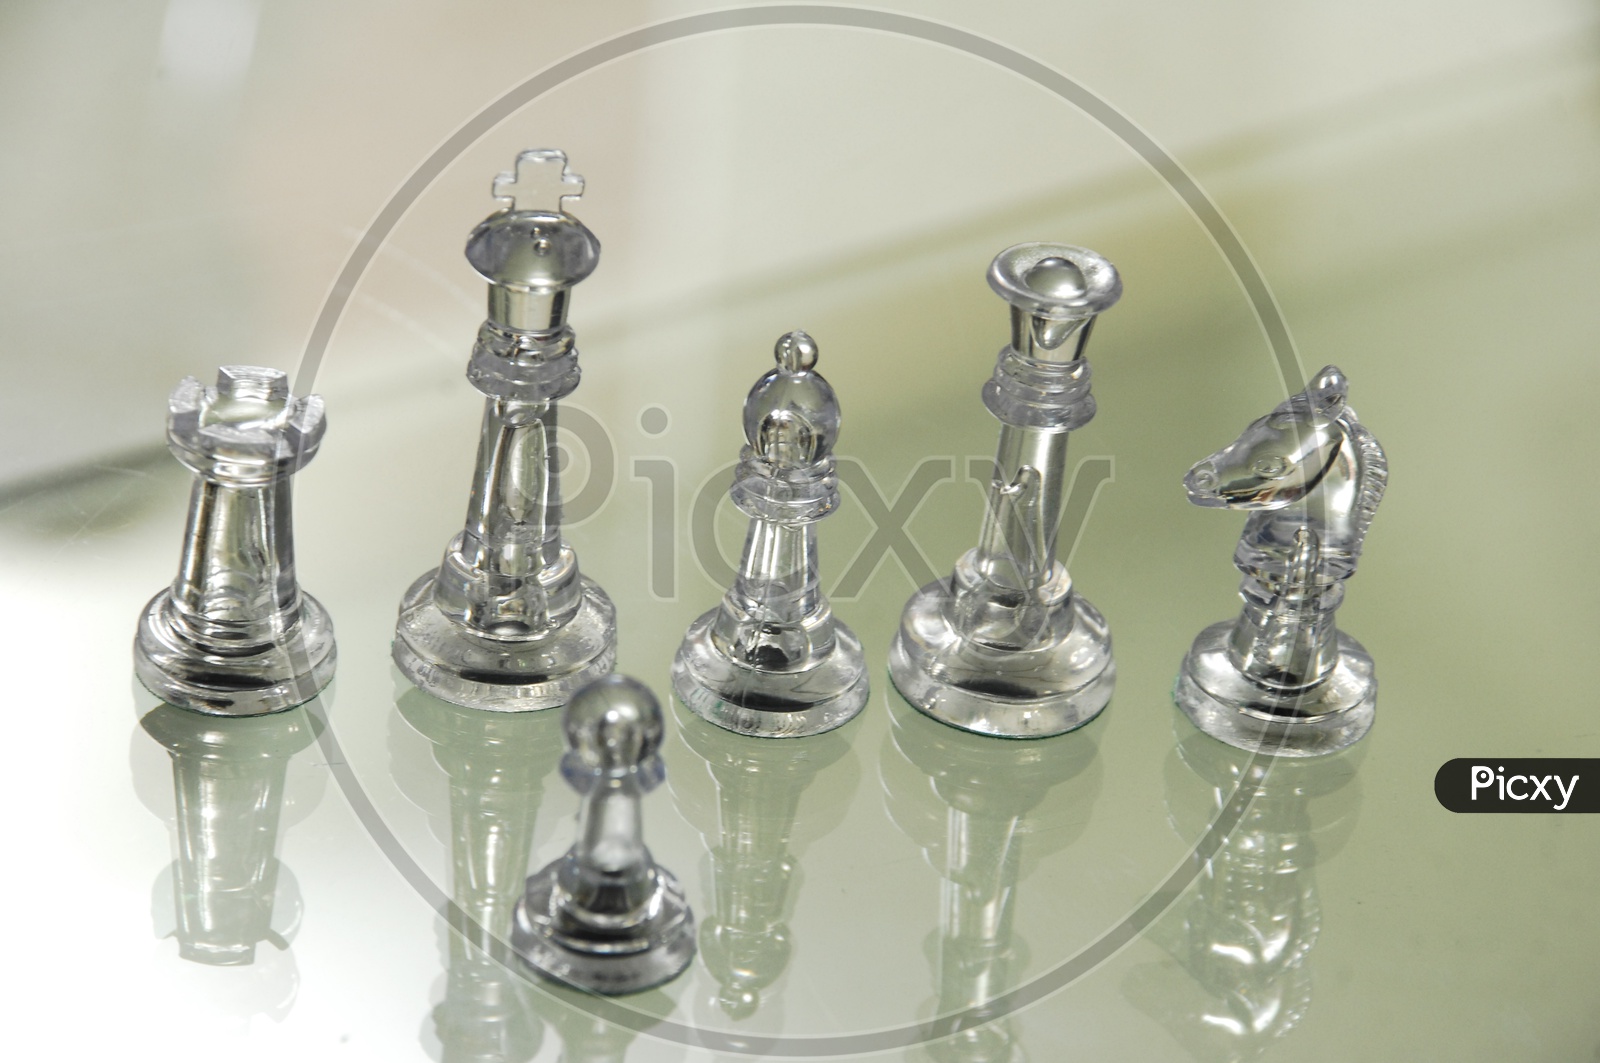 Transparent chess pieces on glass